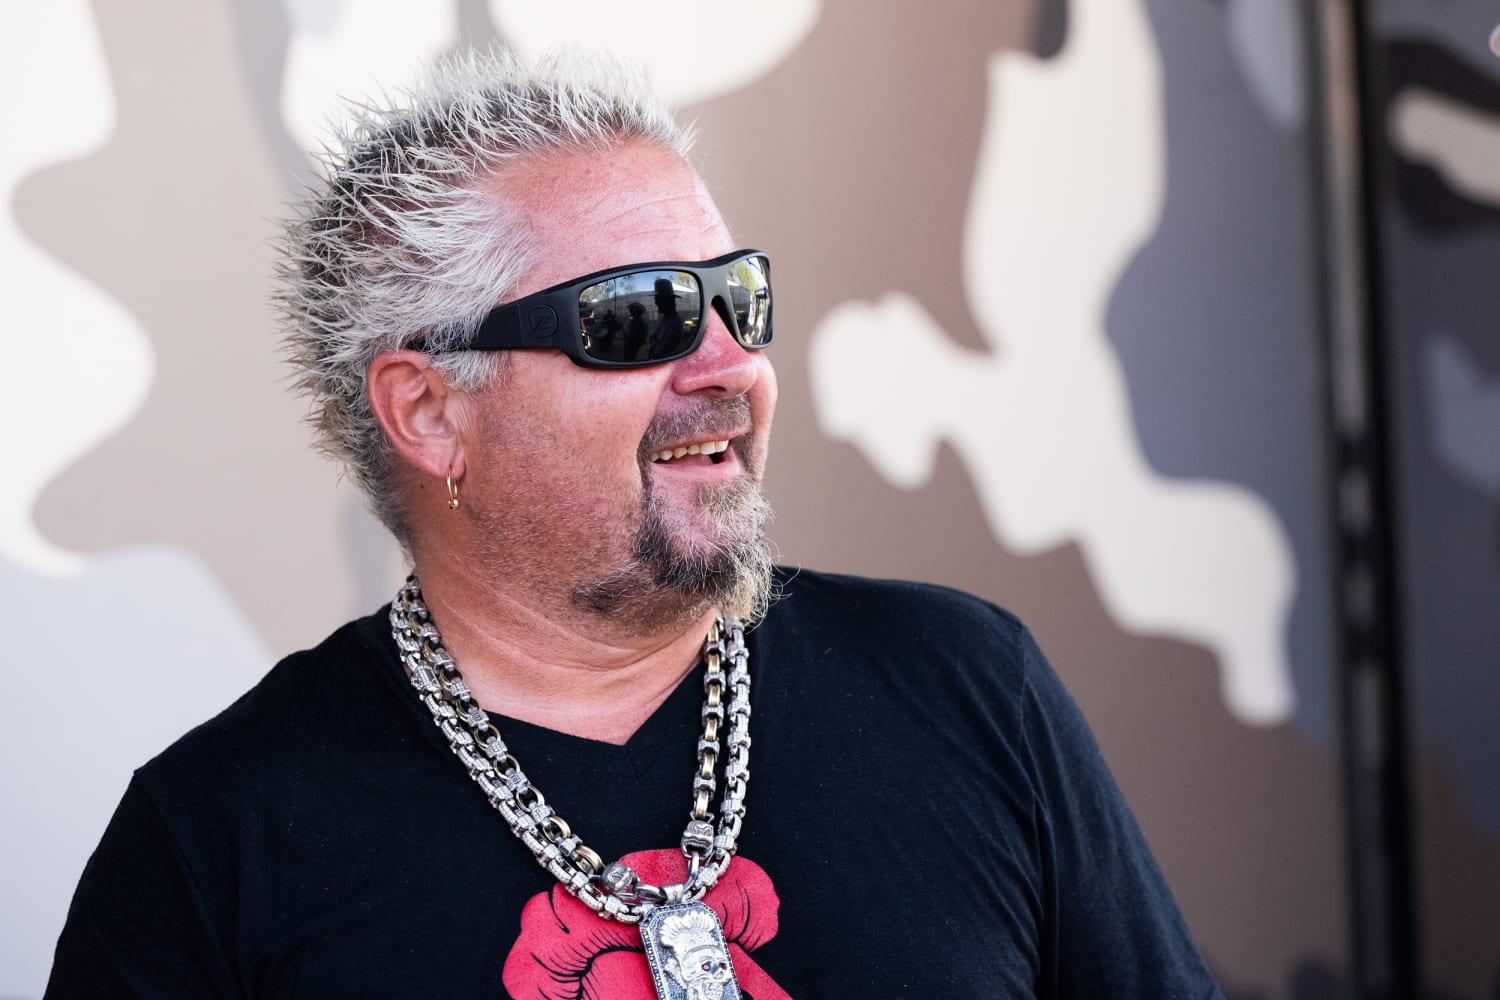 Guy Fieri told his kids he plans to 'die broke' unless they each earn 2 college degrees